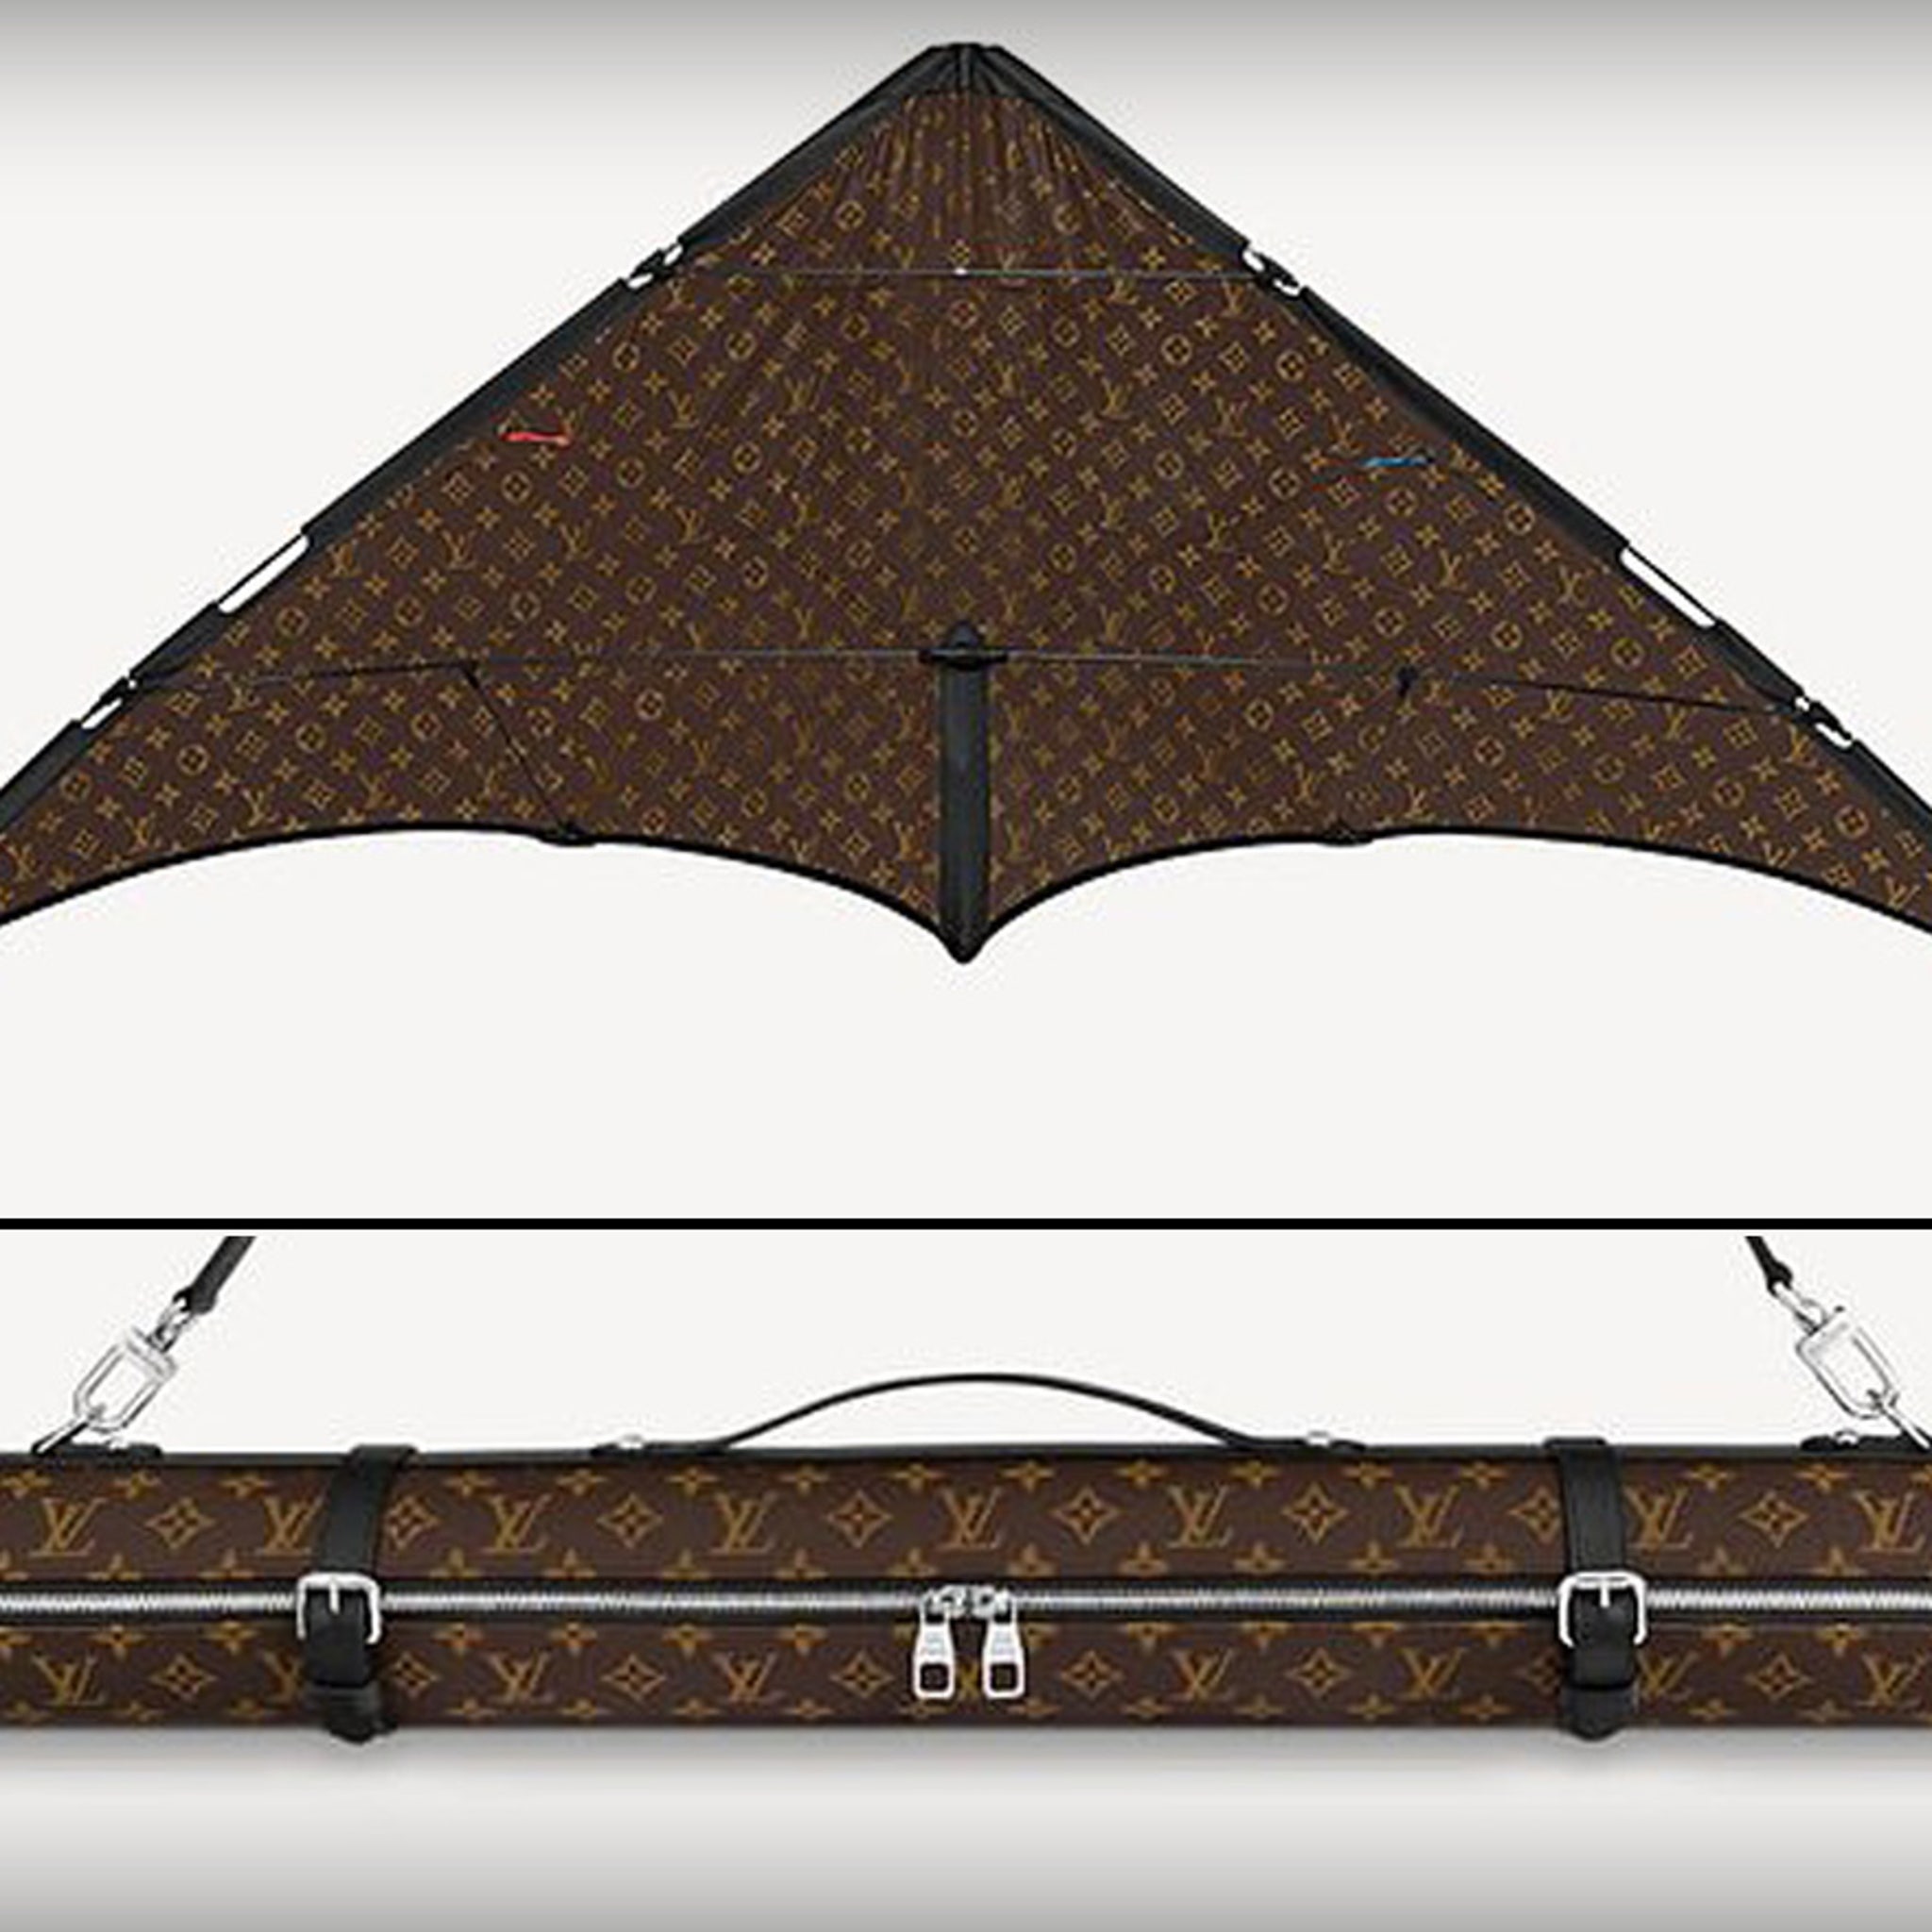 It Better Fly Me Anywhere': $10,000 Louis Vuitton Kite Gets Blasted on  TikTok